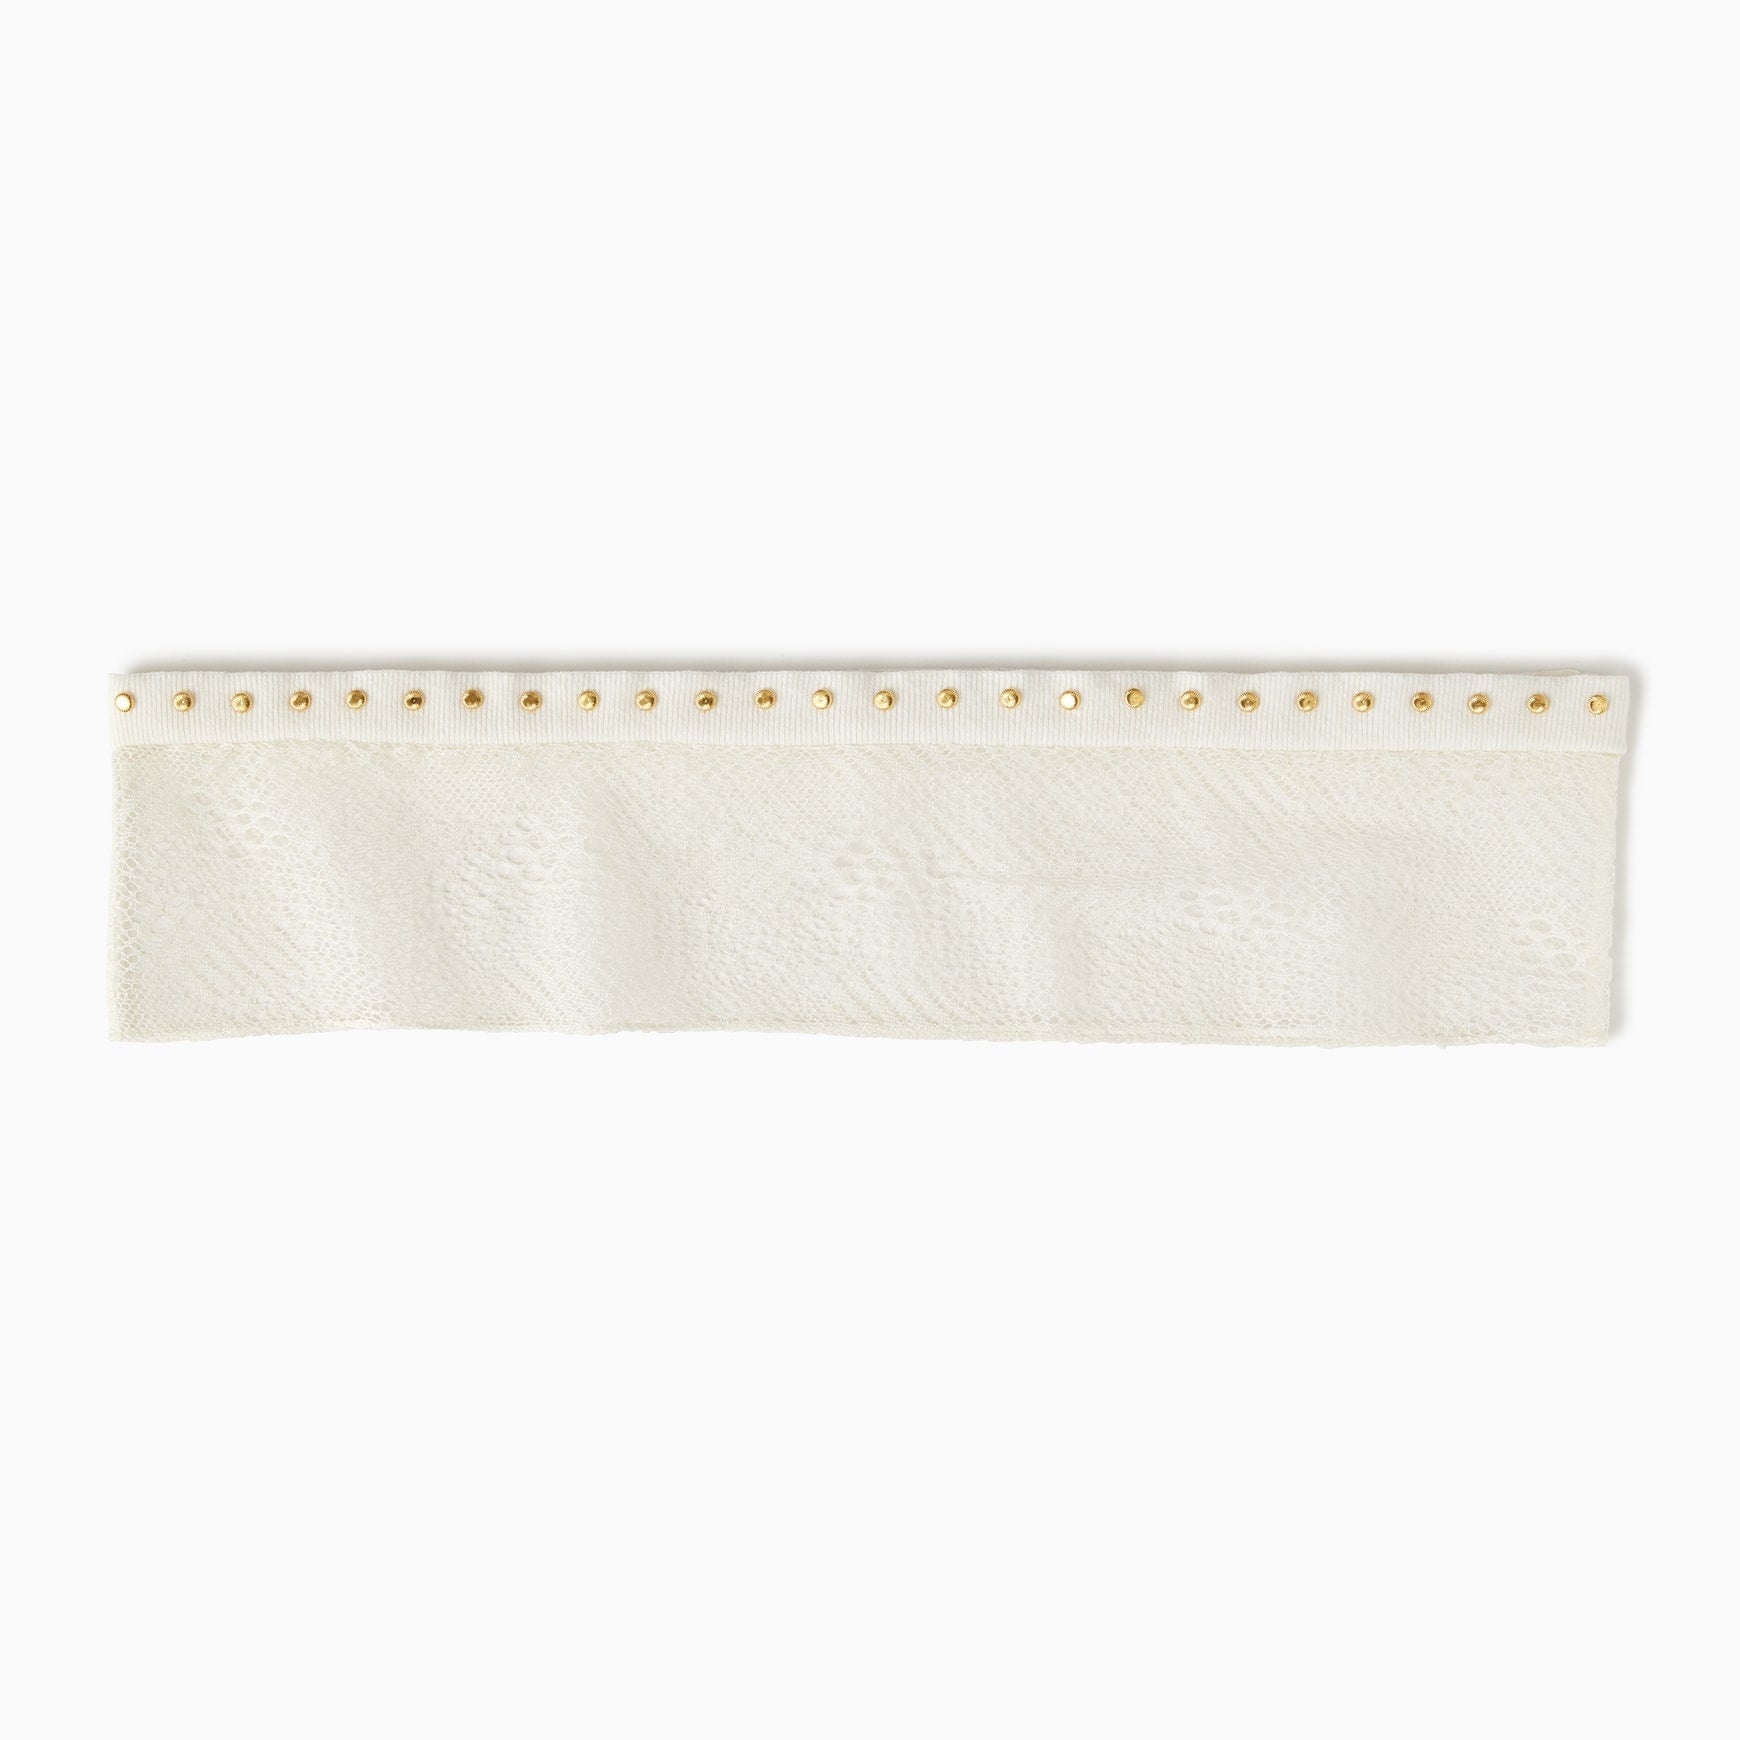 TYPE-1 Knit French Lace Waist Part (White Cells)